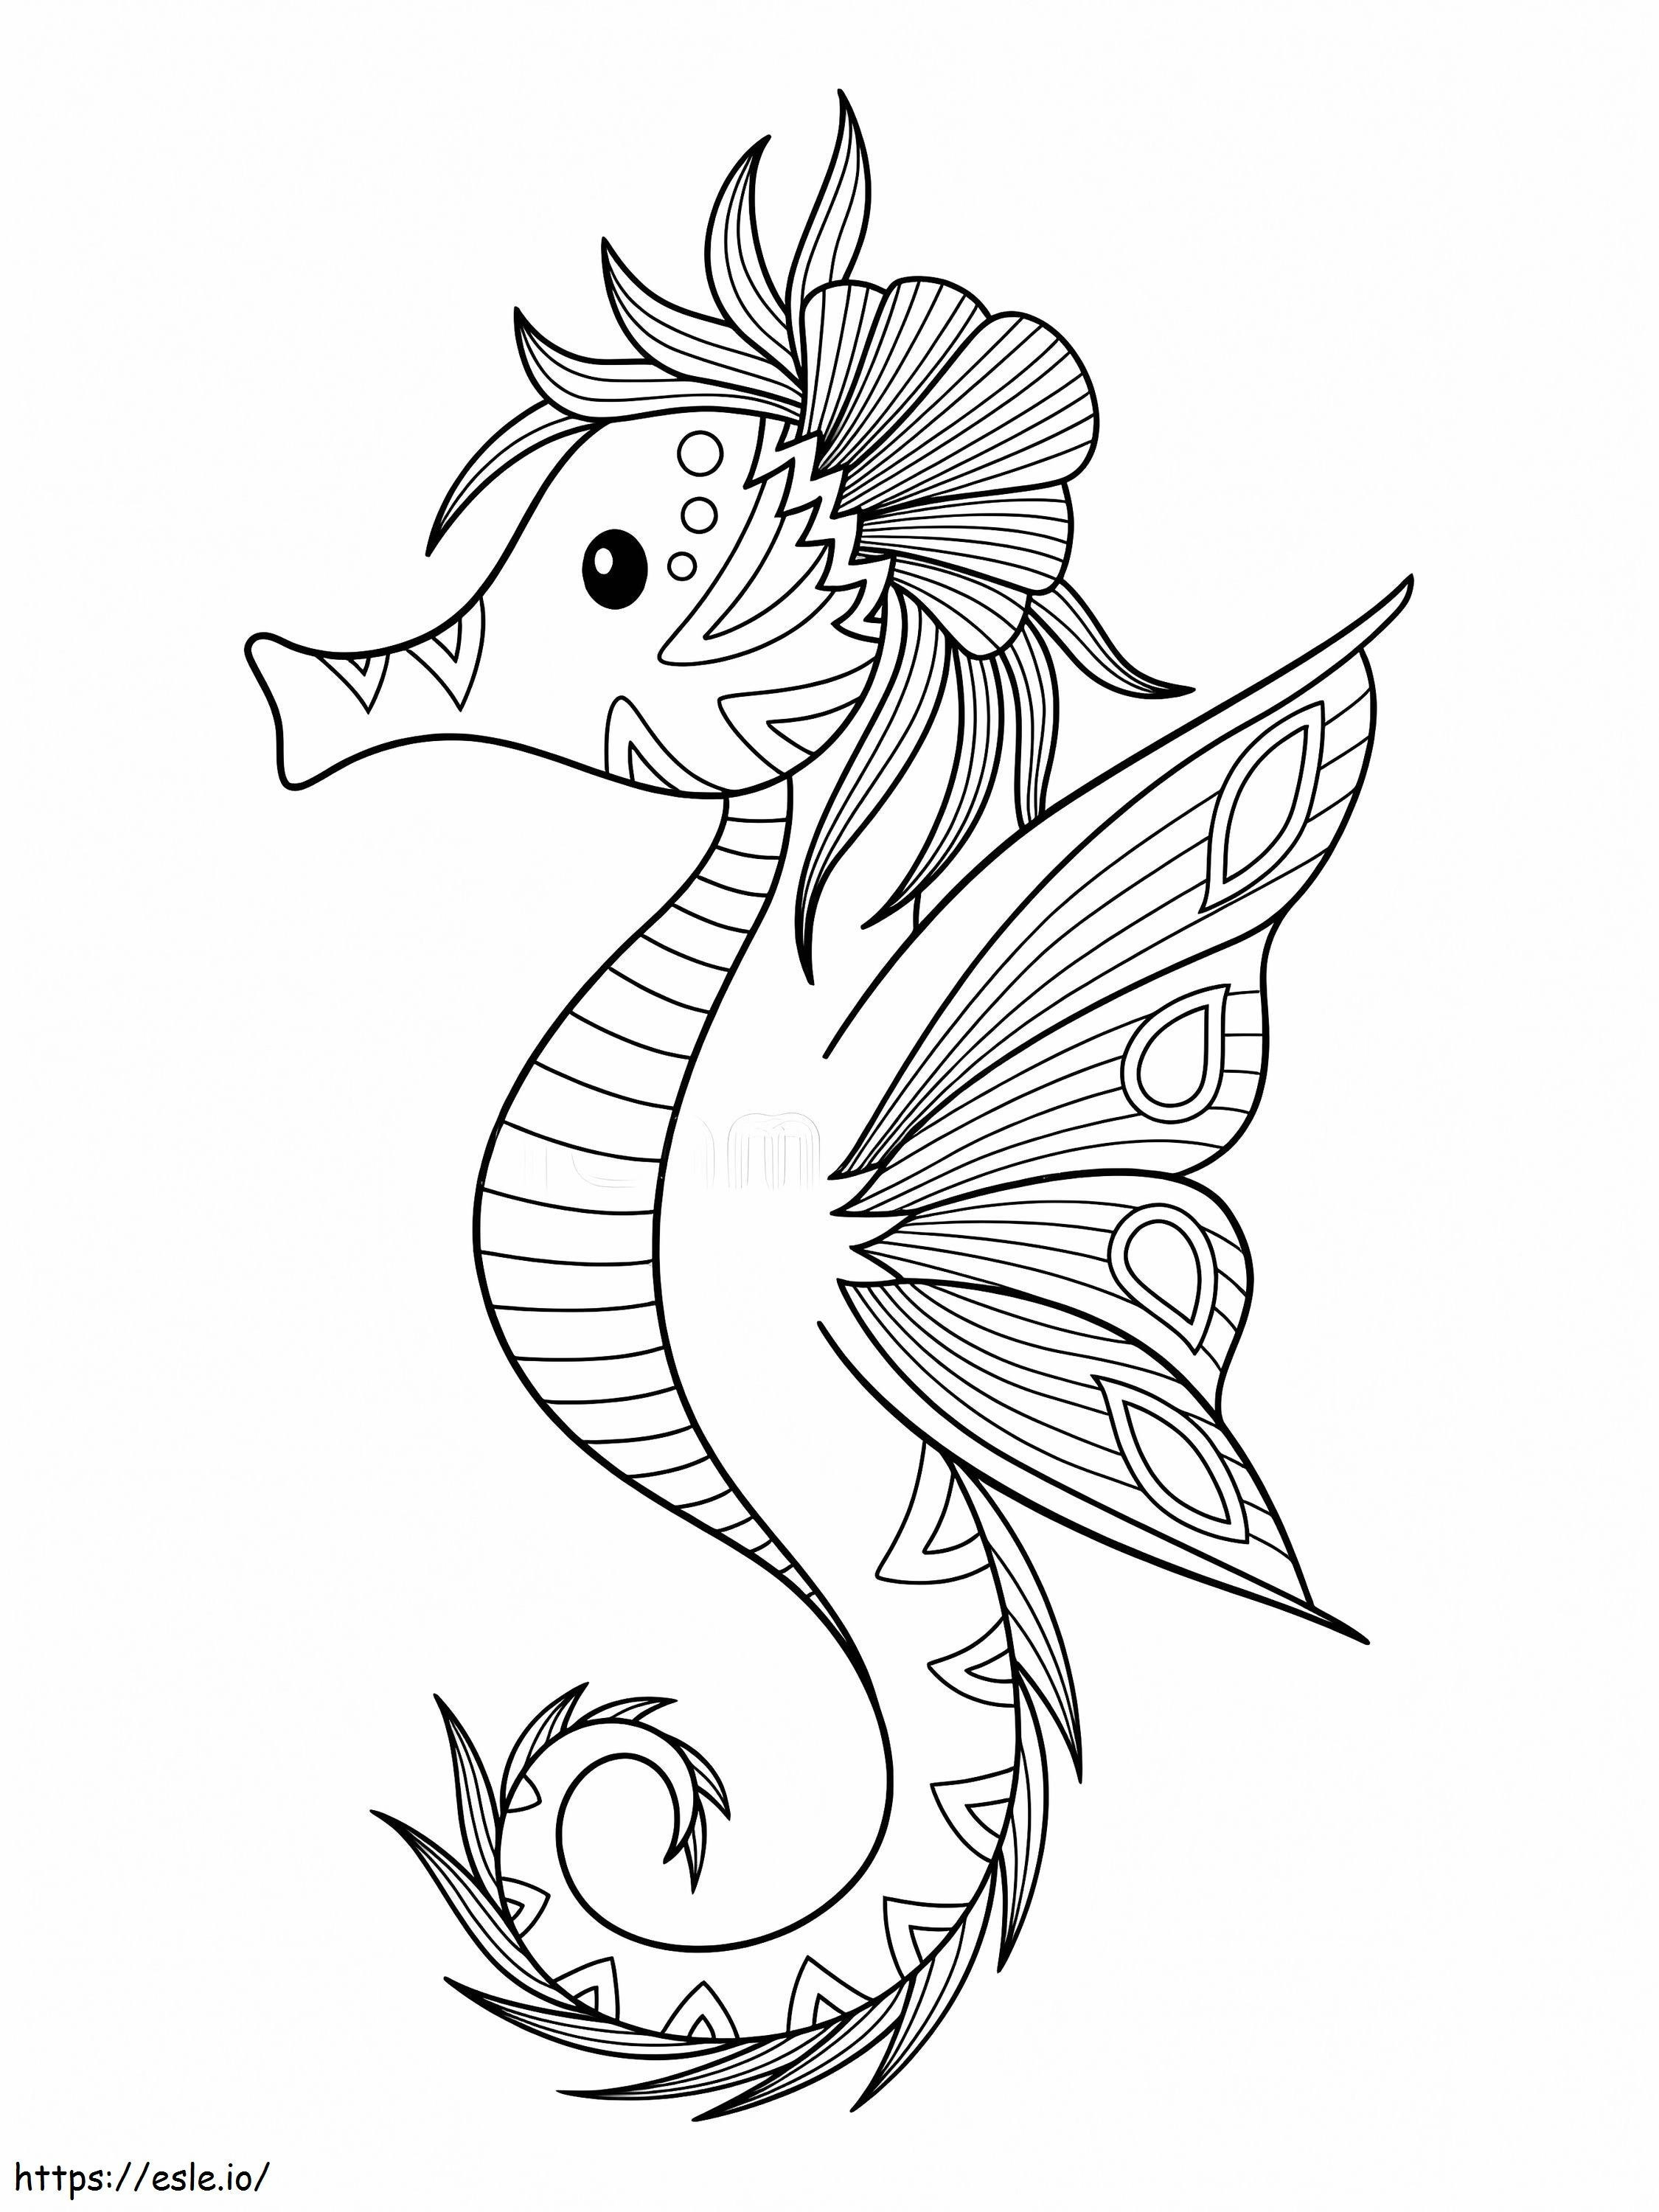 Fairytail Seahorse coloring page